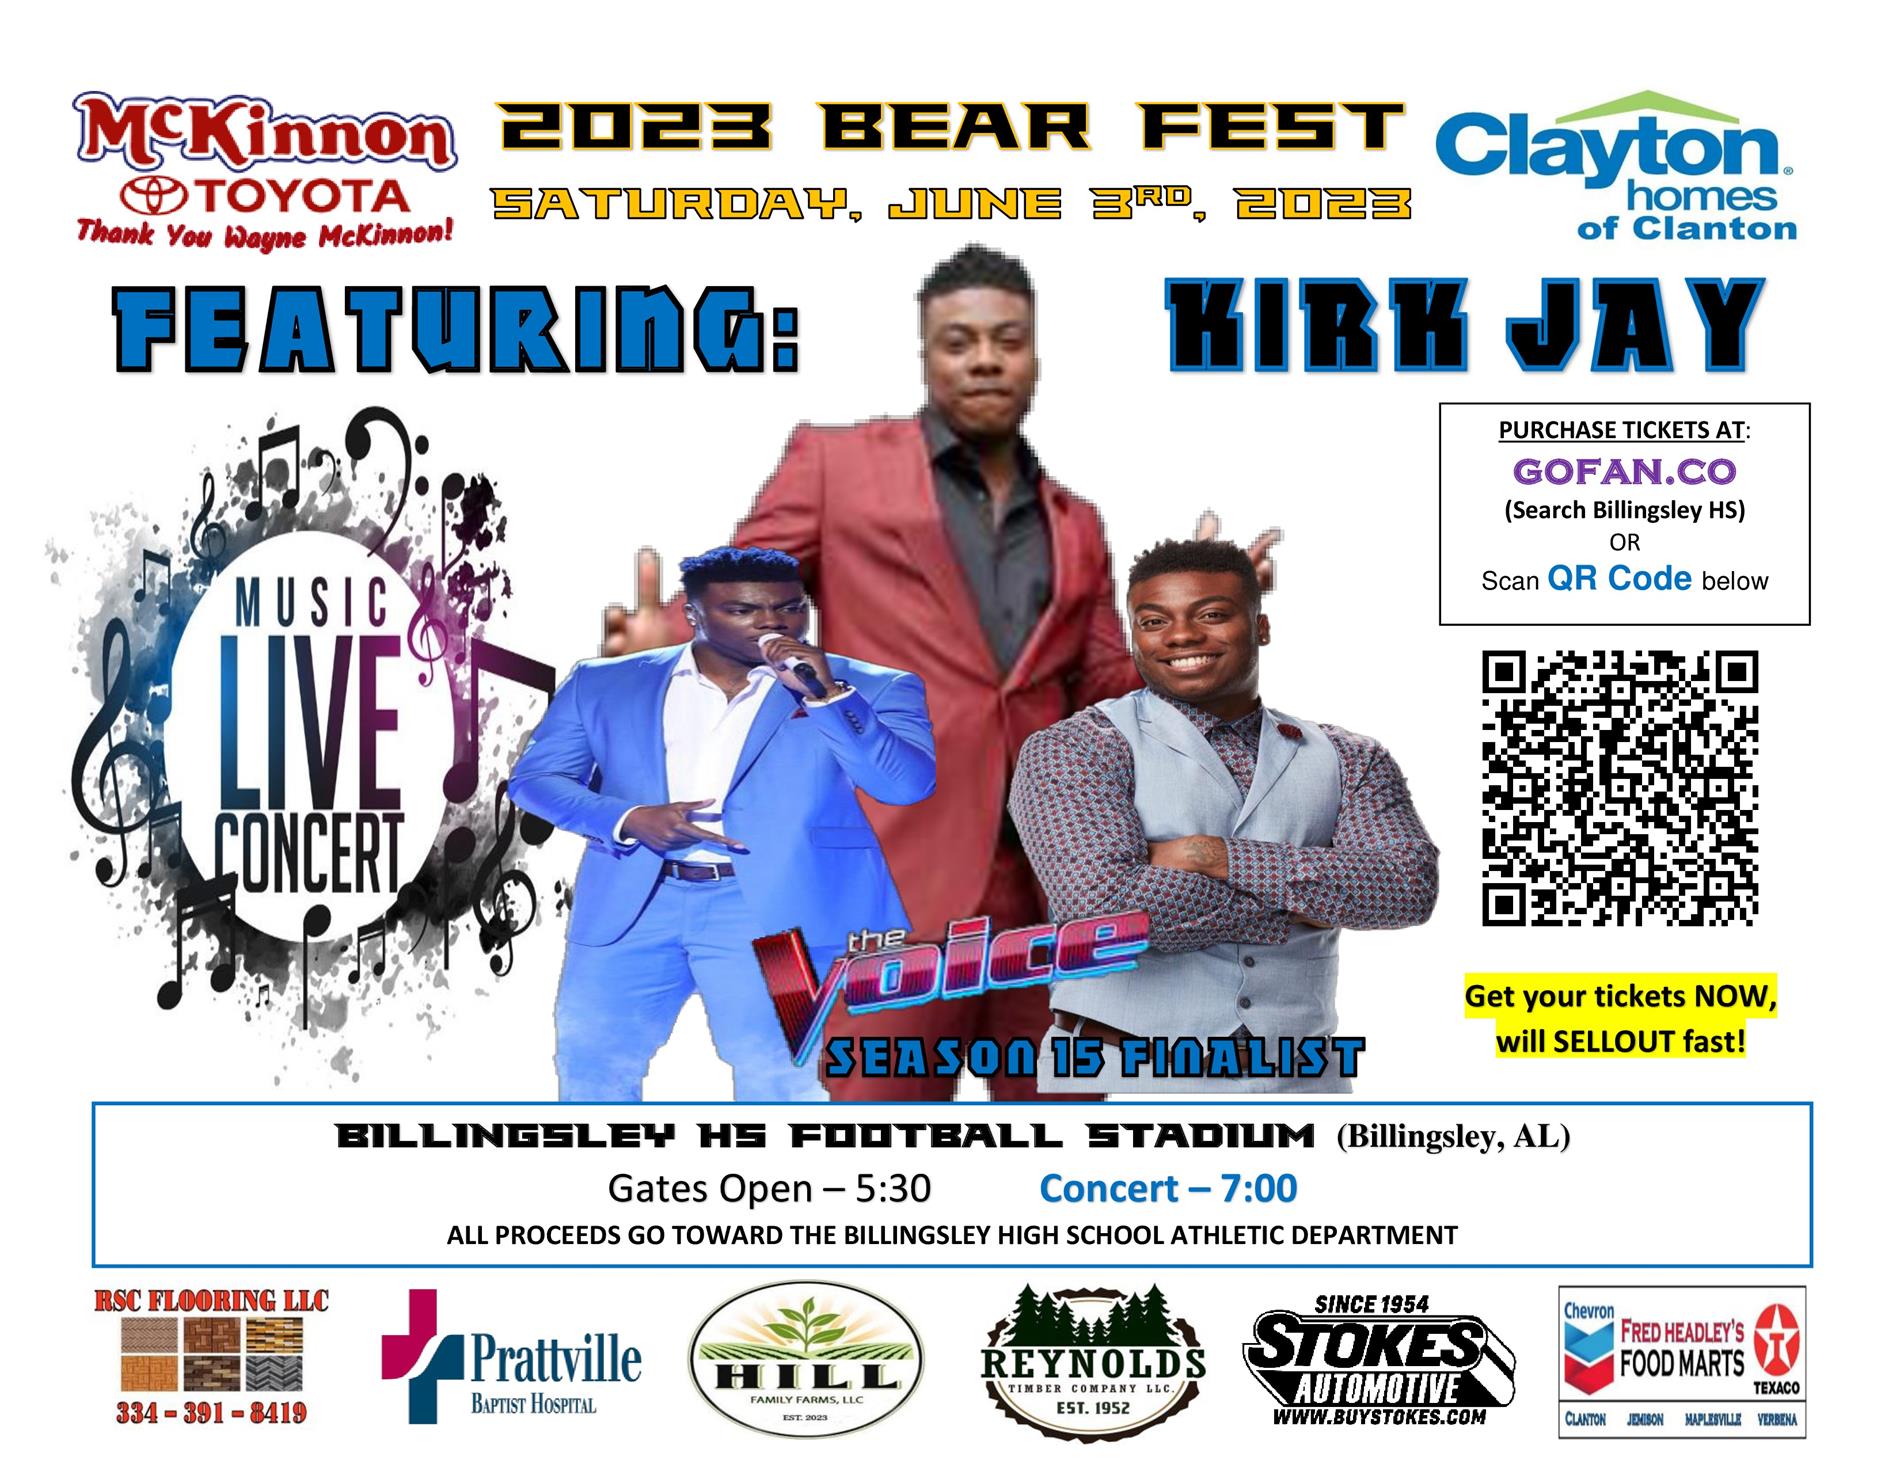 2023 Bear Fest featuring Kirk Jay Concert. June 3 at Billingsley Football Stadium. Gates open at 5:30. Concert at 7:00. Purchase tickets at GoFan.com